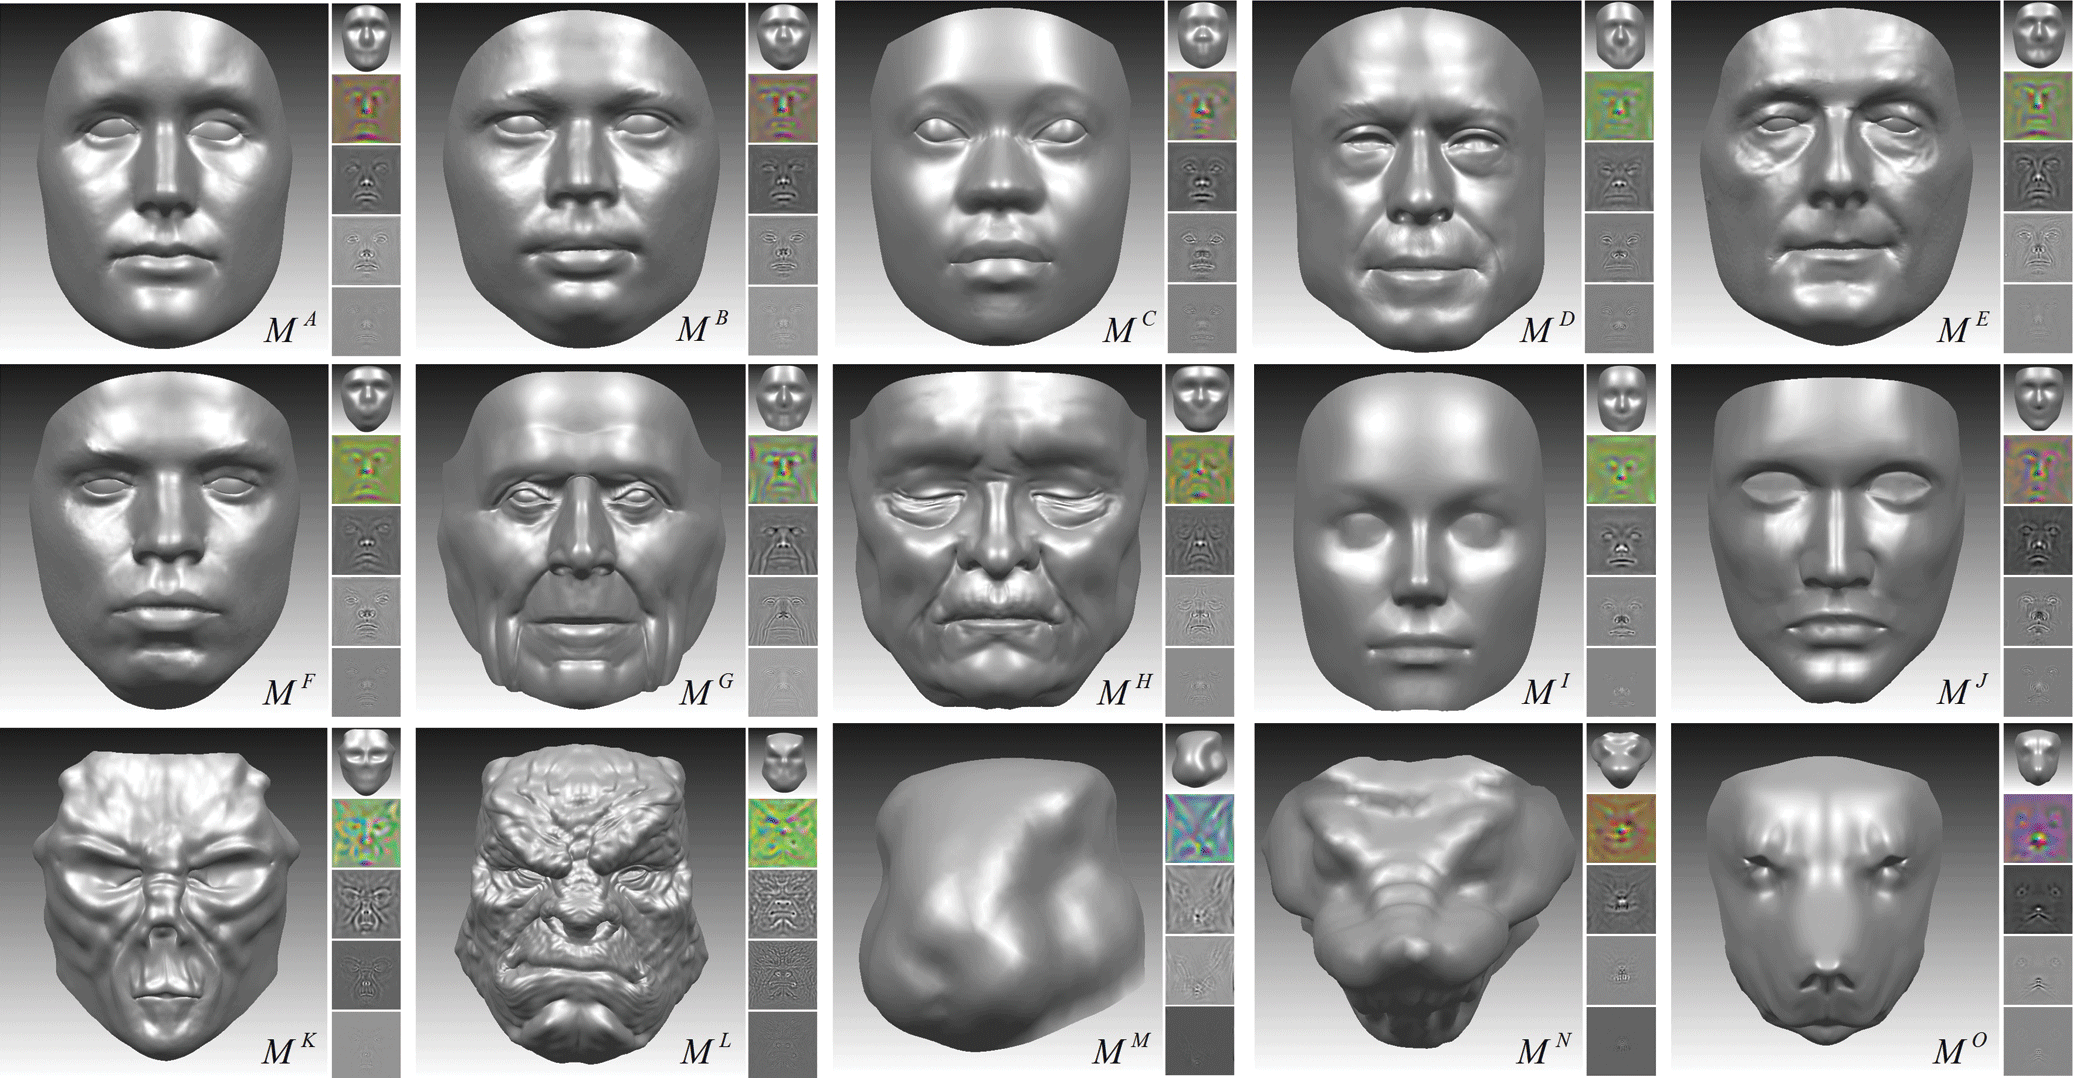 Multiscale face models captured from a set of 15 different face models. The full set consists of 10 human faces and five nonhuman faces including several animals, a monster, and an alien.